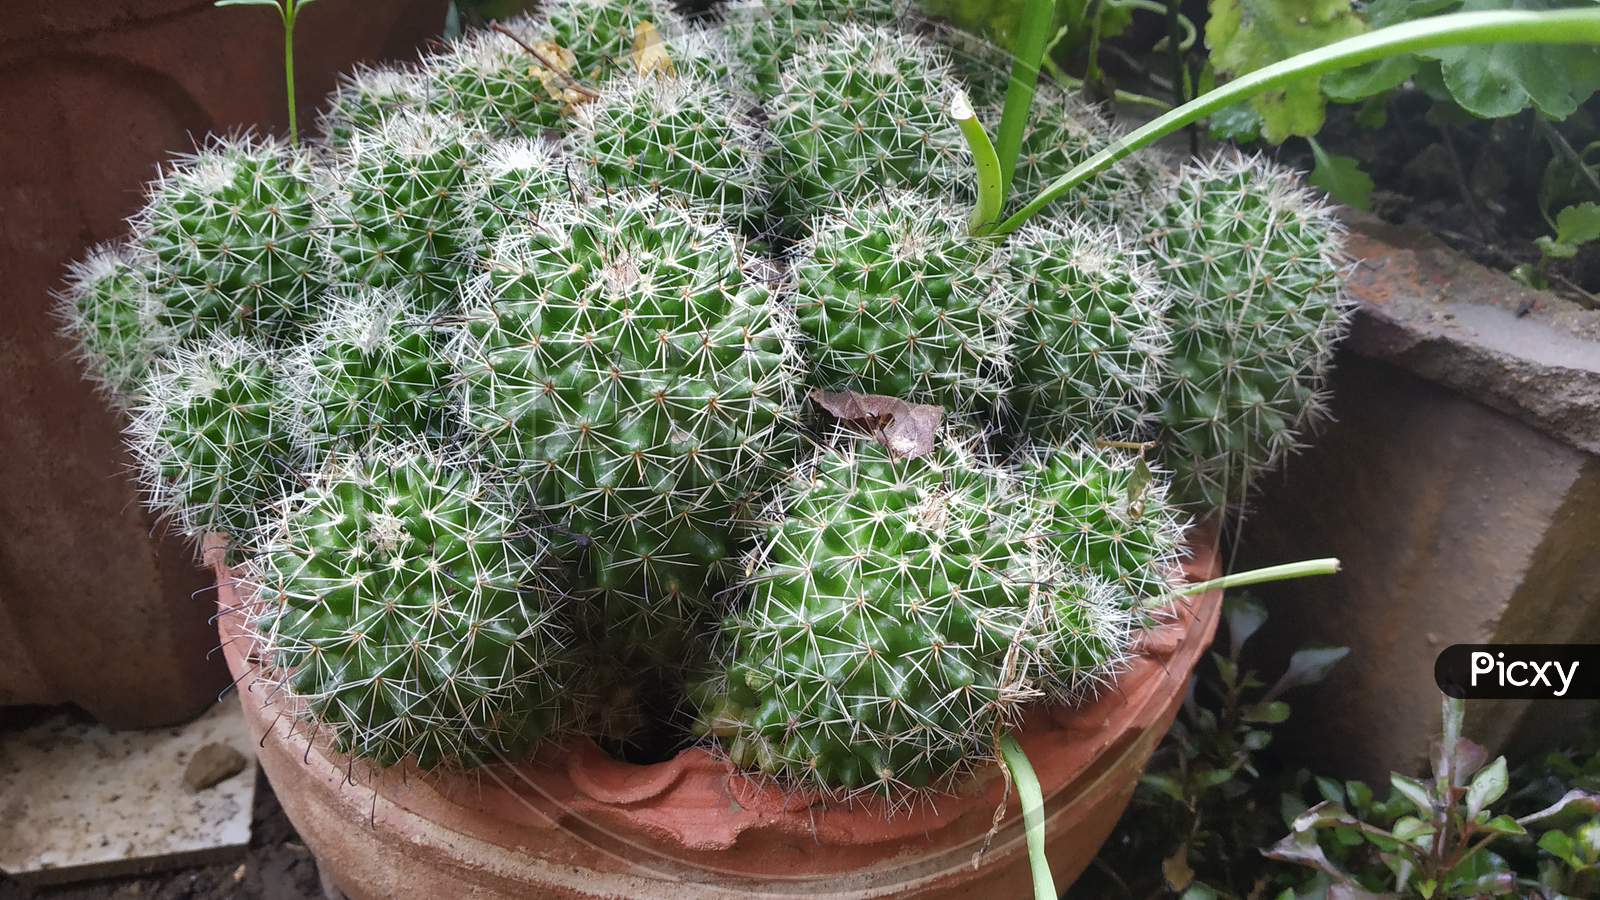 Indian Countryside Cactus Plant In Bucket In Monsoon Season